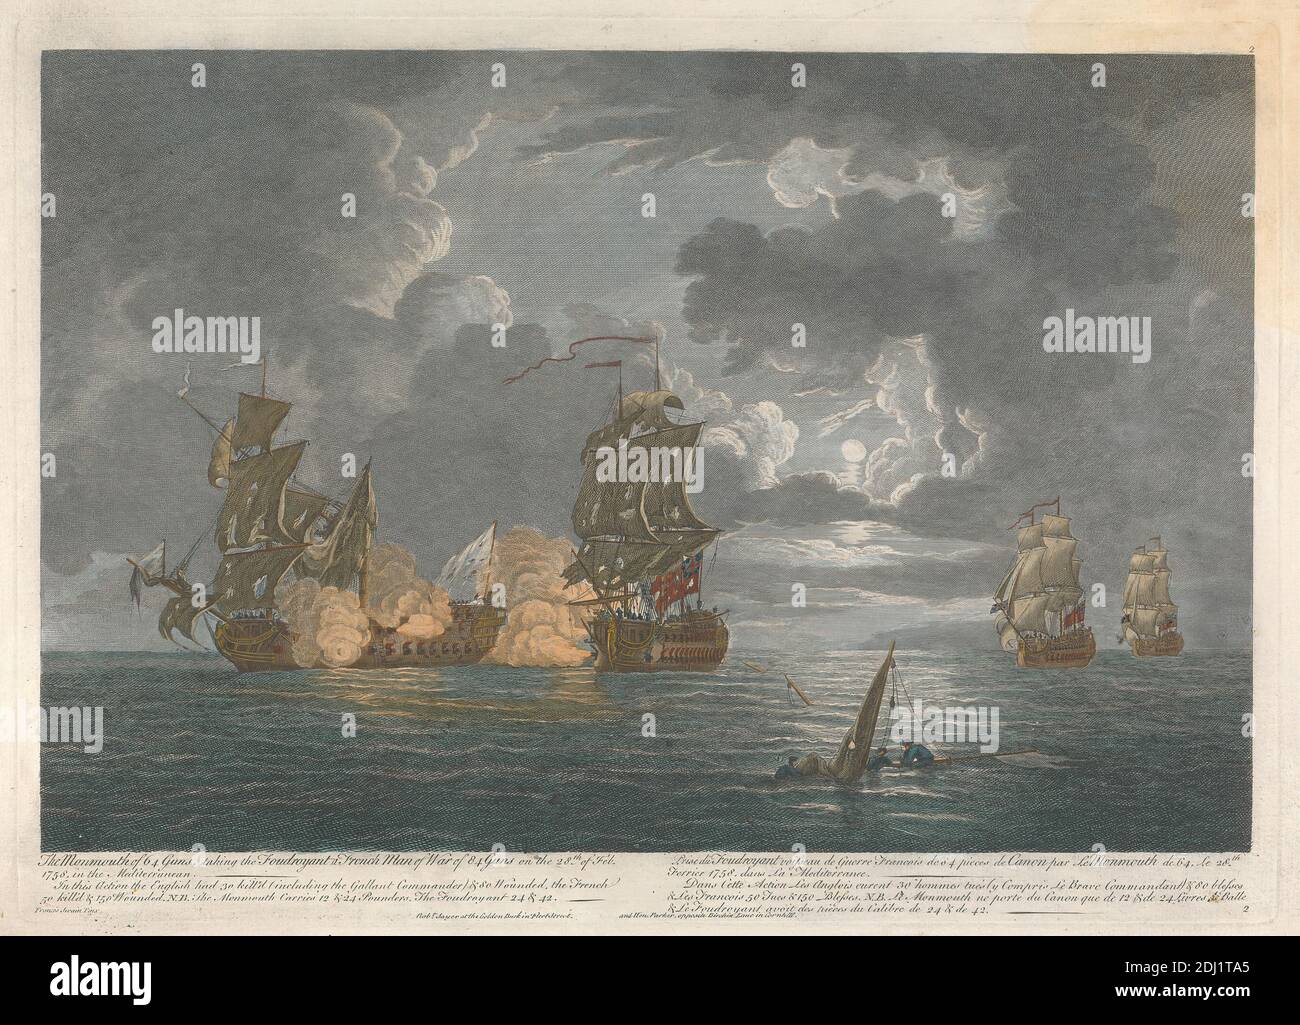 The Monmouth of 64 Guns, taking the Foudroyant a French Man of War of 84 Guns on the 28th of Feb. 1758 in the Mediterranean,...., Print made by Peter P. Benazech, 1767–1794, after Francis Swaine, 1730–1782, British, Published by Robert Sayer, 1725–1794, British, Published by Henry Parker, 1725–1809, British, ca. 1760, Line engraving and etching with hand colored ink on moderately thick, slightly textured, cream laid paper, Sheet: 14 5/8 x 21 1/16 inches (37.1 x 53.5 cm), Plate: 13 3/16 x 18 3/8 inches (33.5 x 46.7 cm), and Image: 11 5/8 x 17 11/16 inches (29.5 x 45 cm), battle, cannons, clouds Stock Photo